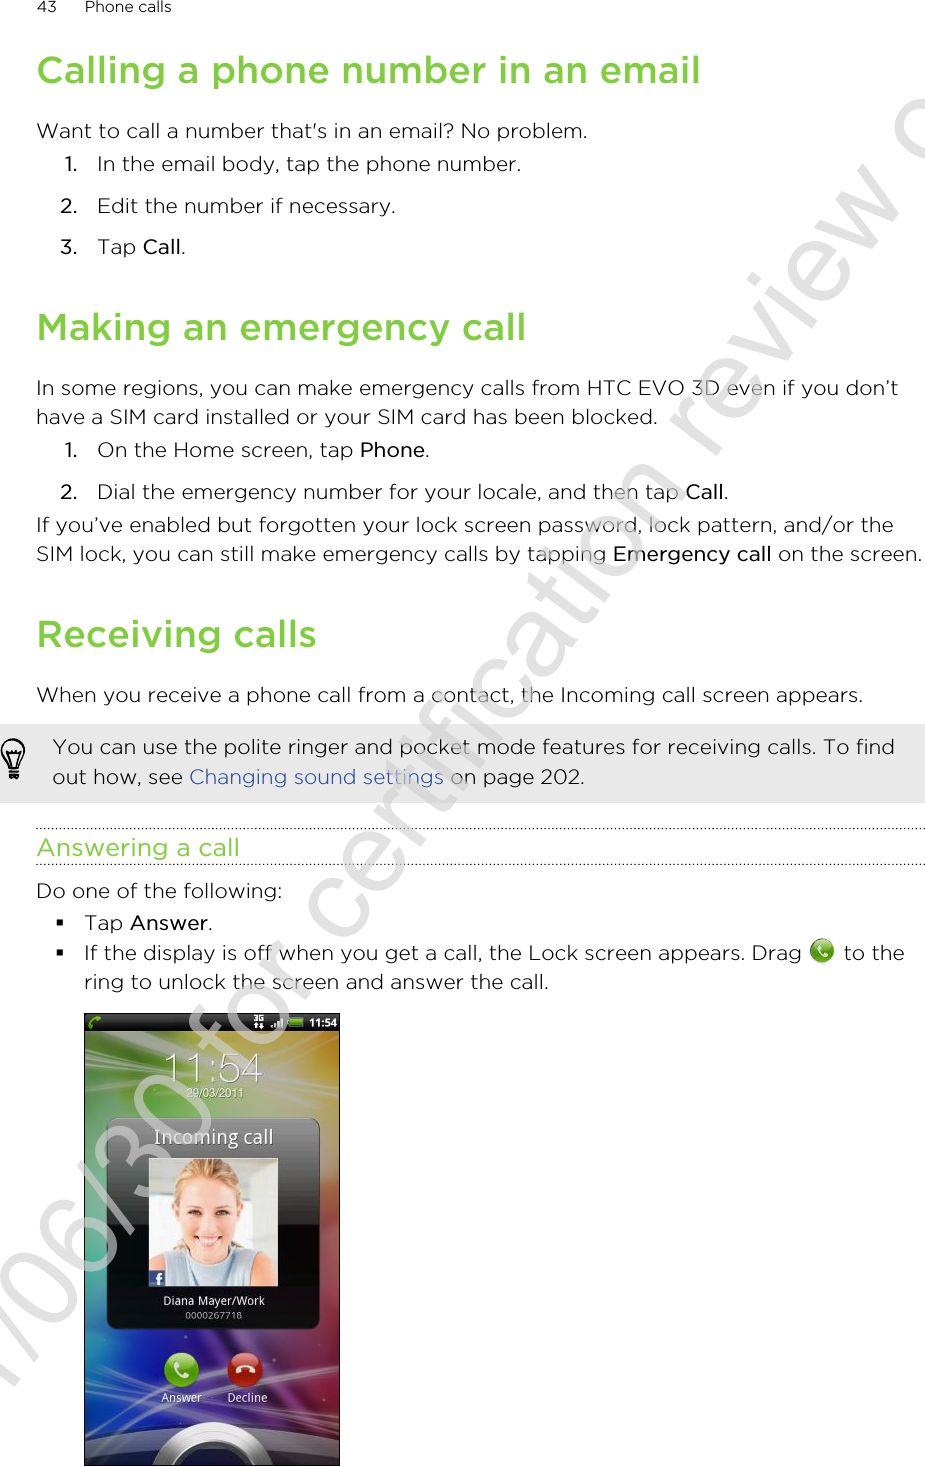 Calling a phone number in an emailWant to call a number that&apos;s in an email? No problem.1. In the email body, tap the phone number.2. Edit the number if necessary.3. Tap Call.Making an emergency callIn some regions, you can make emergency calls from HTC EVO 3D even if you don’thave a SIM card installed or your SIM card has been blocked.1. On the Home screen, tap Phone.2. Dial the emergency number for your locale, and then tap Call.If you’ve enabled but forgotten your lock screen password, lock pattern, and/or theSIM lock, you can still make emergency calls by tapping Emergency call on the screen.Receiving callsWhen you receive a phone call from a contact, the Incoming call screen appears.You can use the polite ringer and pocket mode features for receiving calls. To findout how, see Changing sound settings on page 202.Answering a callDo one of the following:§Tap Answer.§If the display is off when you get a call, the Lock screen appears. Drag   to thering to unlock the screen and answer the call.43 Phone calls2011/06/30 for certification review only